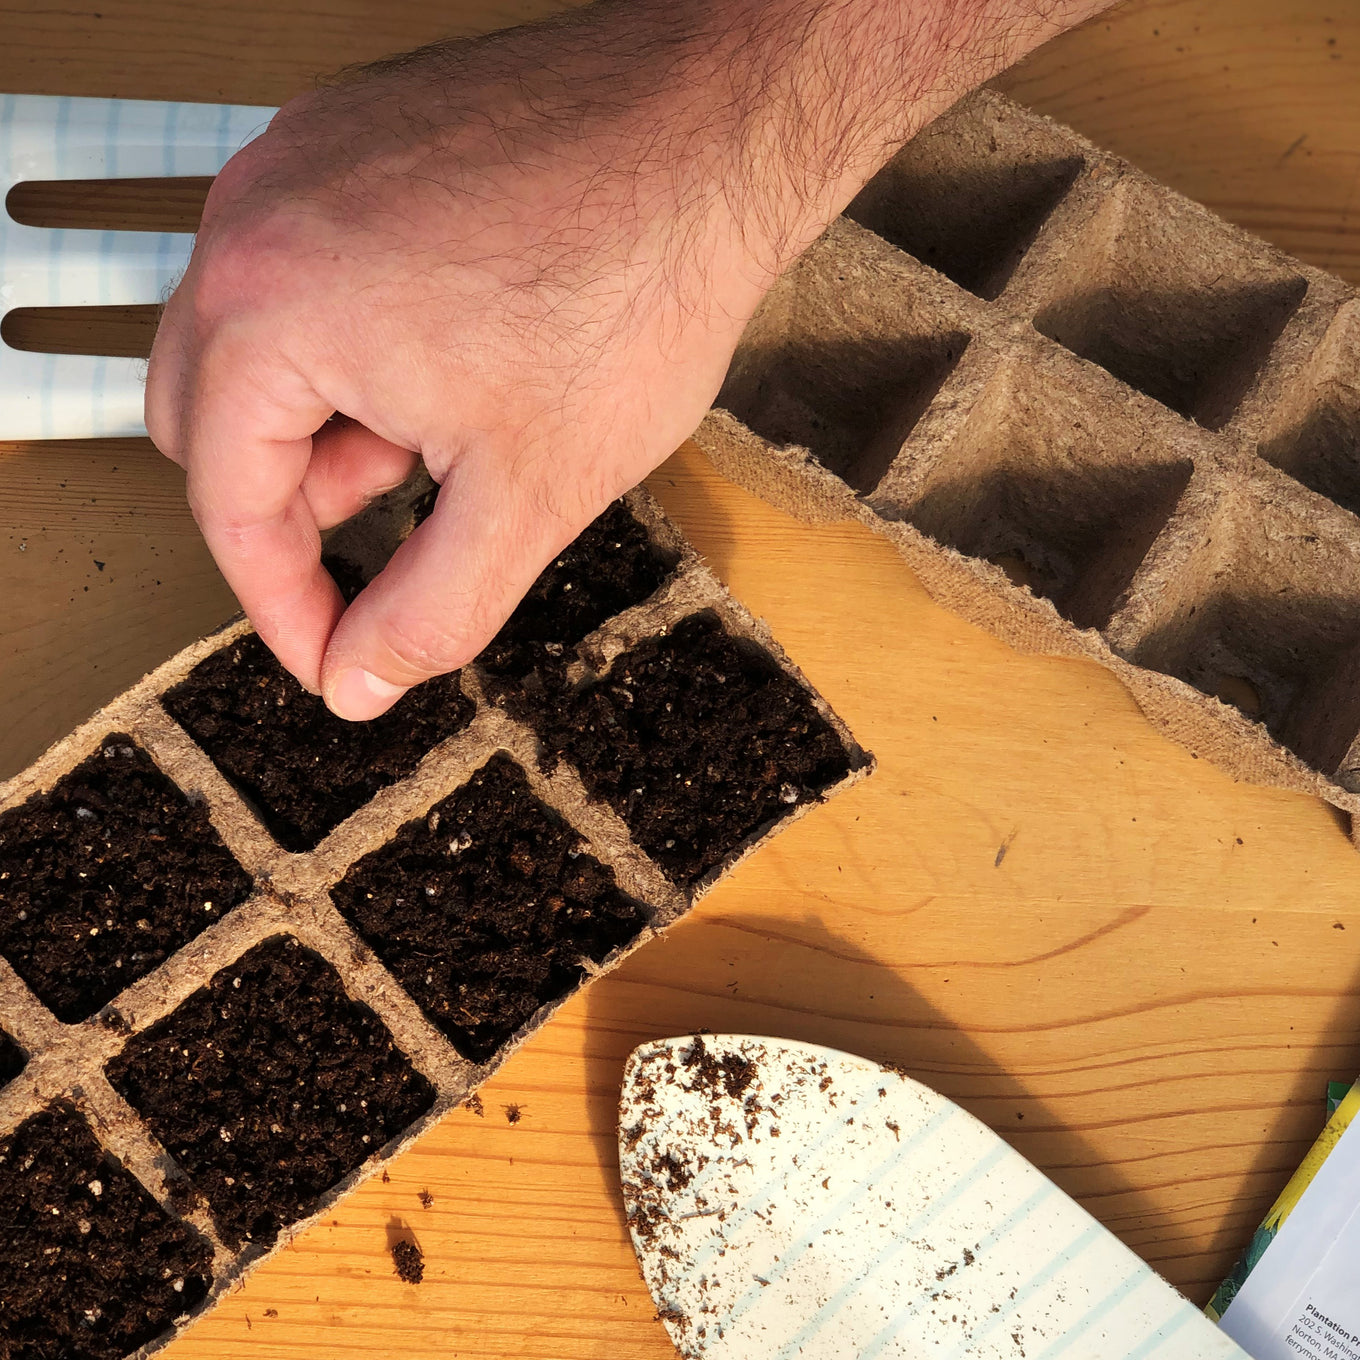 Sowing Organic Sweetie Tomato Seeds into Jiffy biodegradable seed starting peat strip trays filled with seed starting mix.